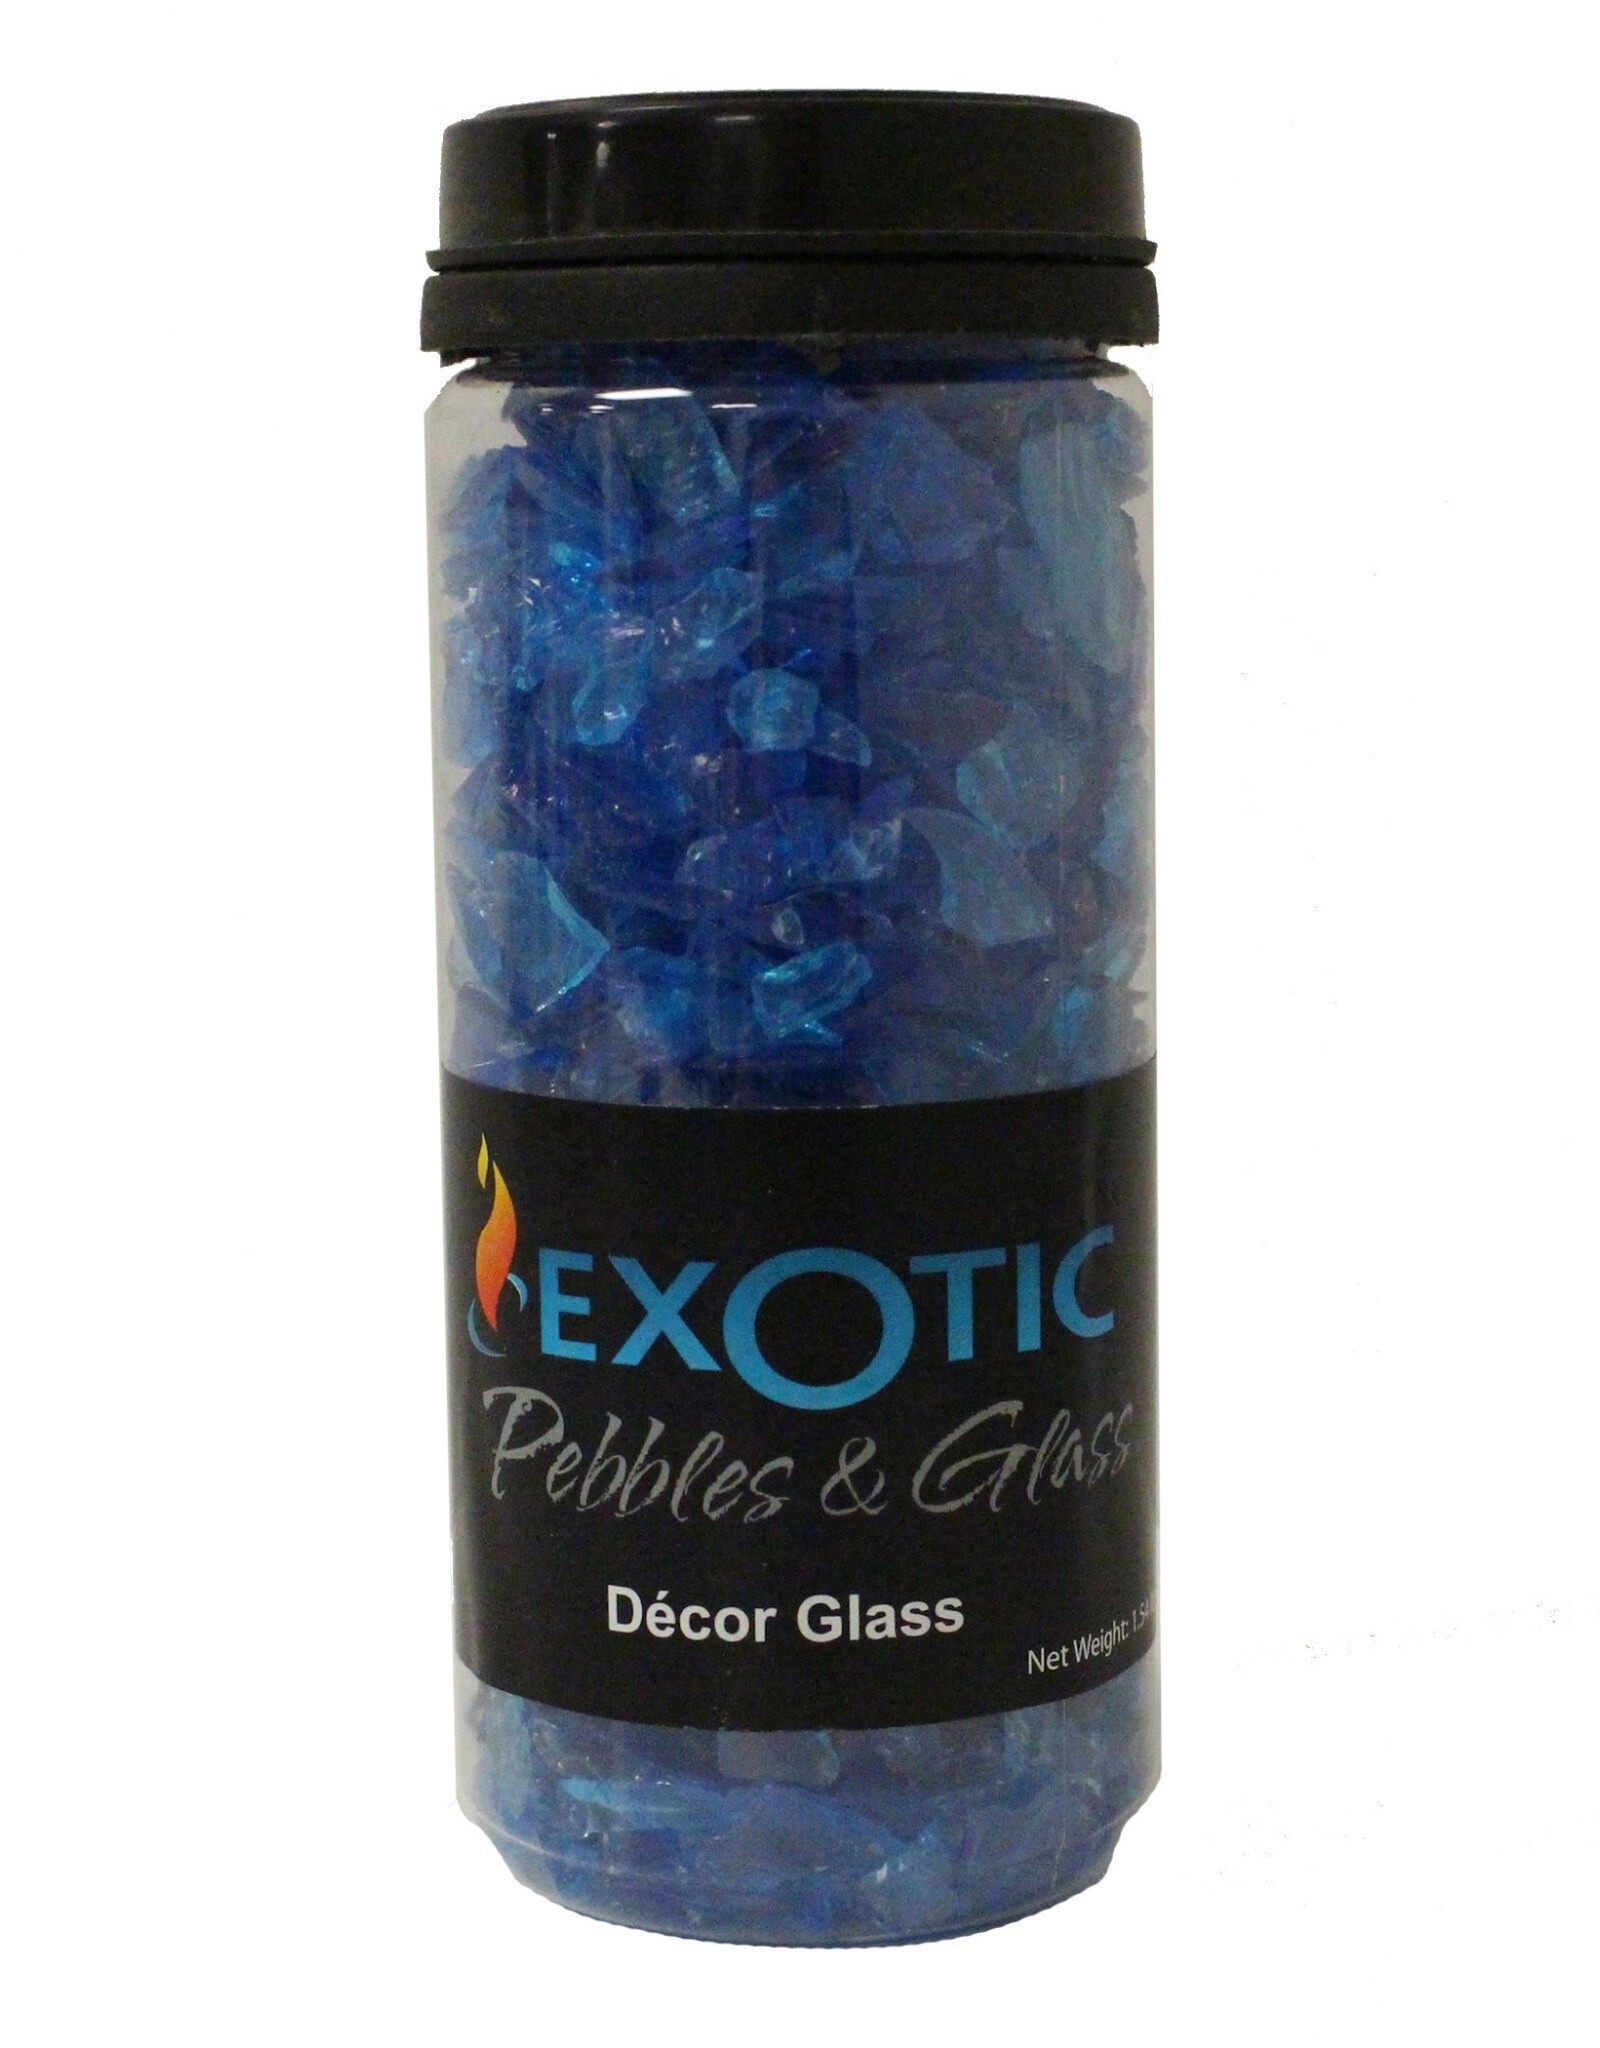 Exotic Pebbles® Décor Glass  - 1.48lb Jar - Turquoise - 1/4in-1/2in Pieces